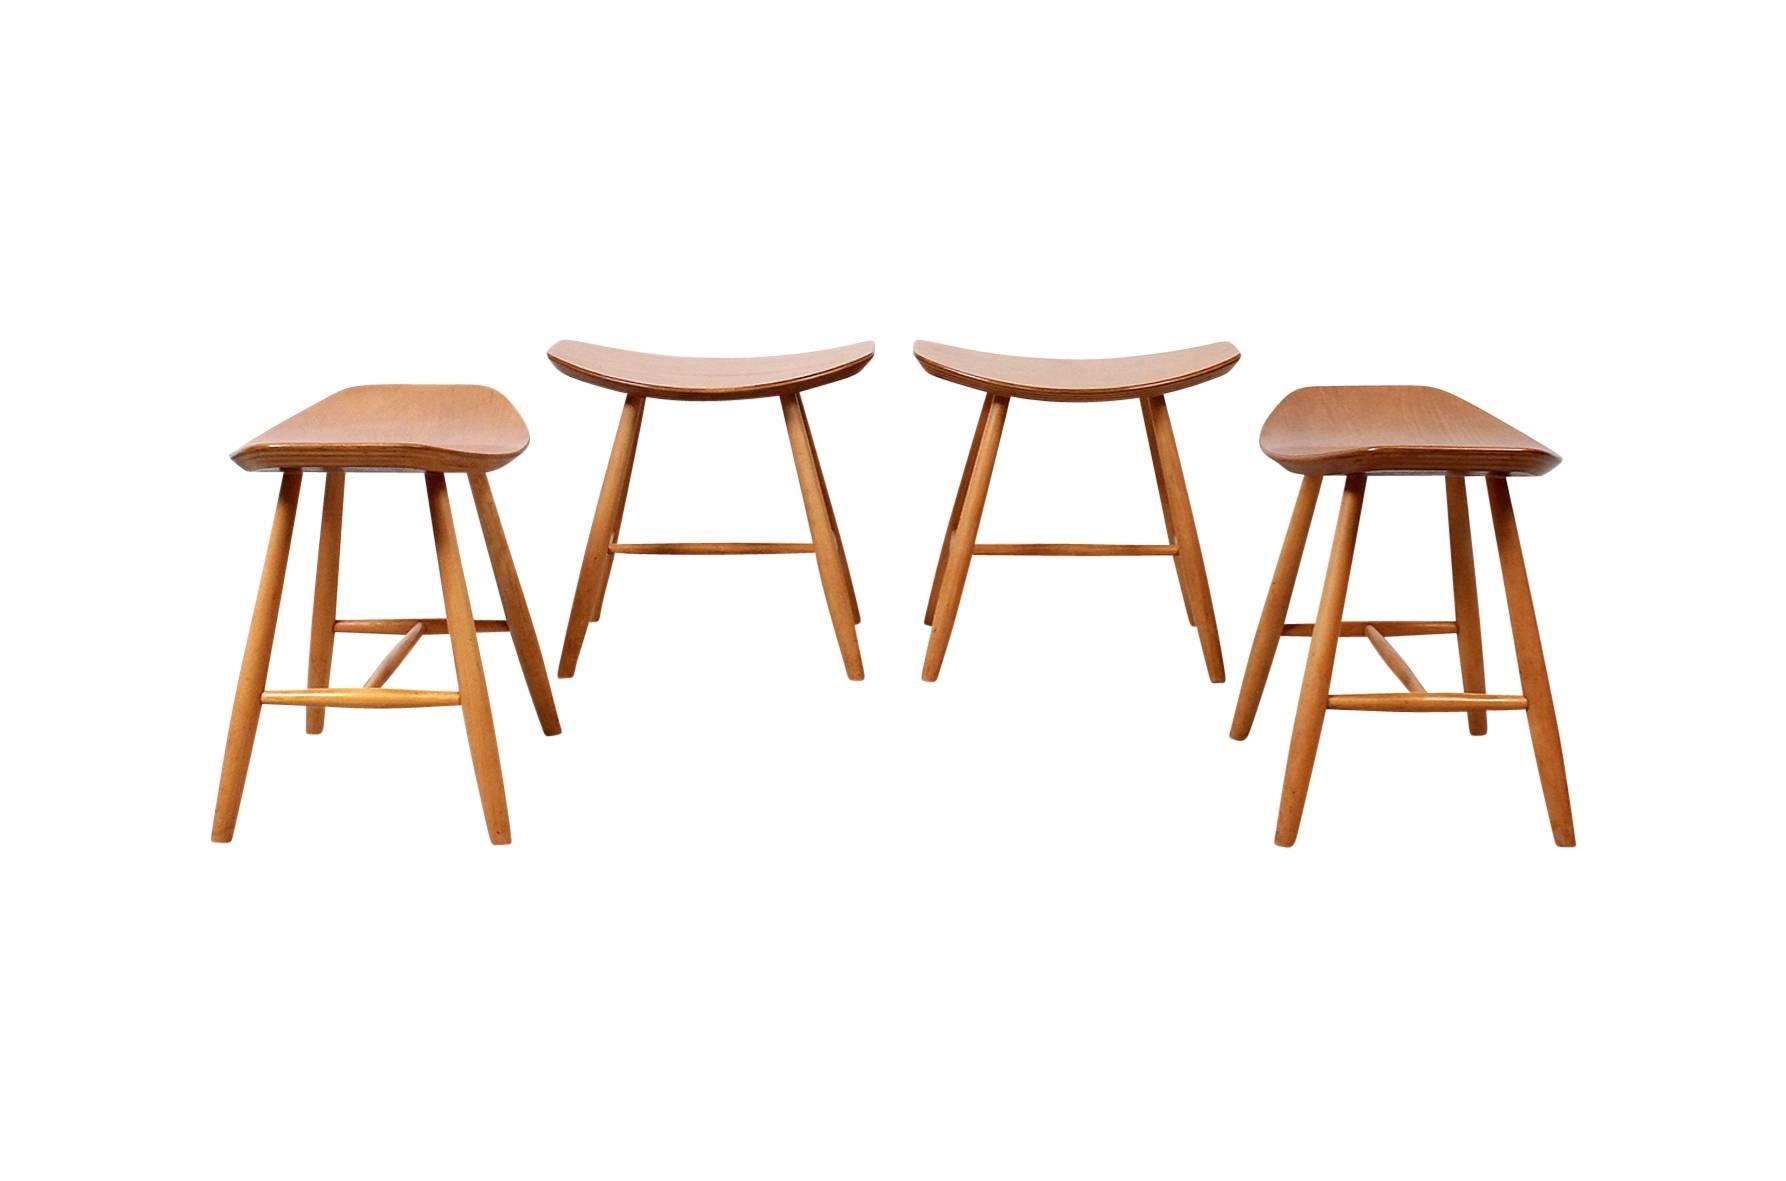 Set of four birch stools by Ejvind Johansson and produced by FDB Mobler, Denmark. These are considered Model J63. Attractive and comfortable design. Pair price available upon request.